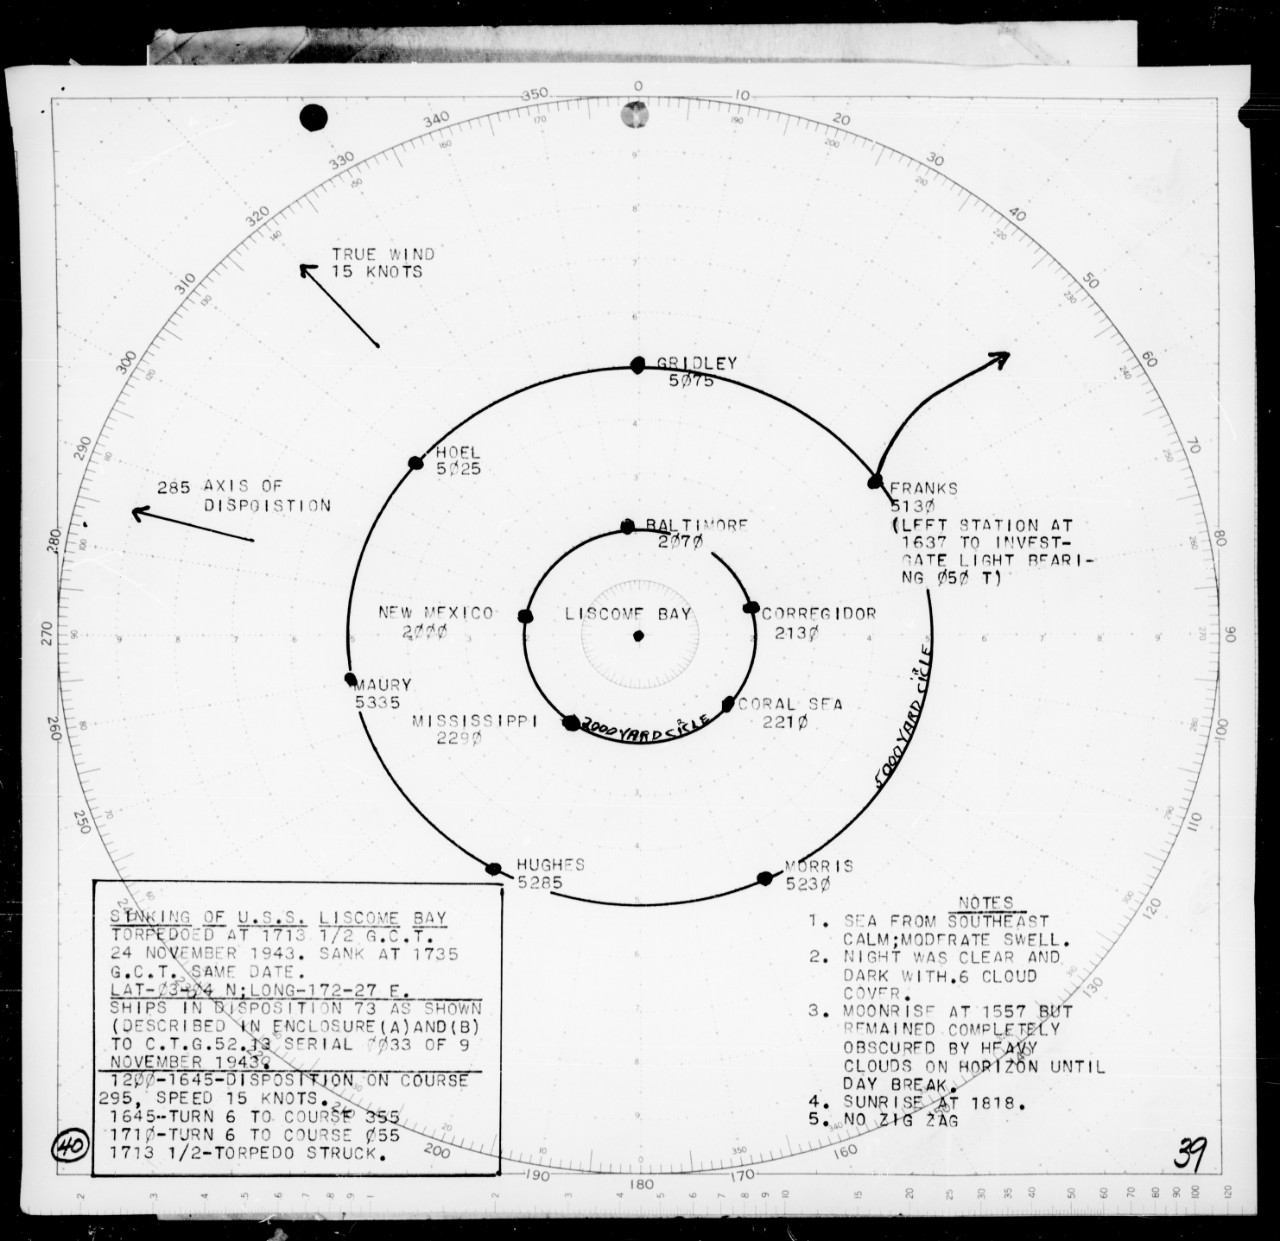 Black and white chart shoing positions of ships on the night of 24 November 1943